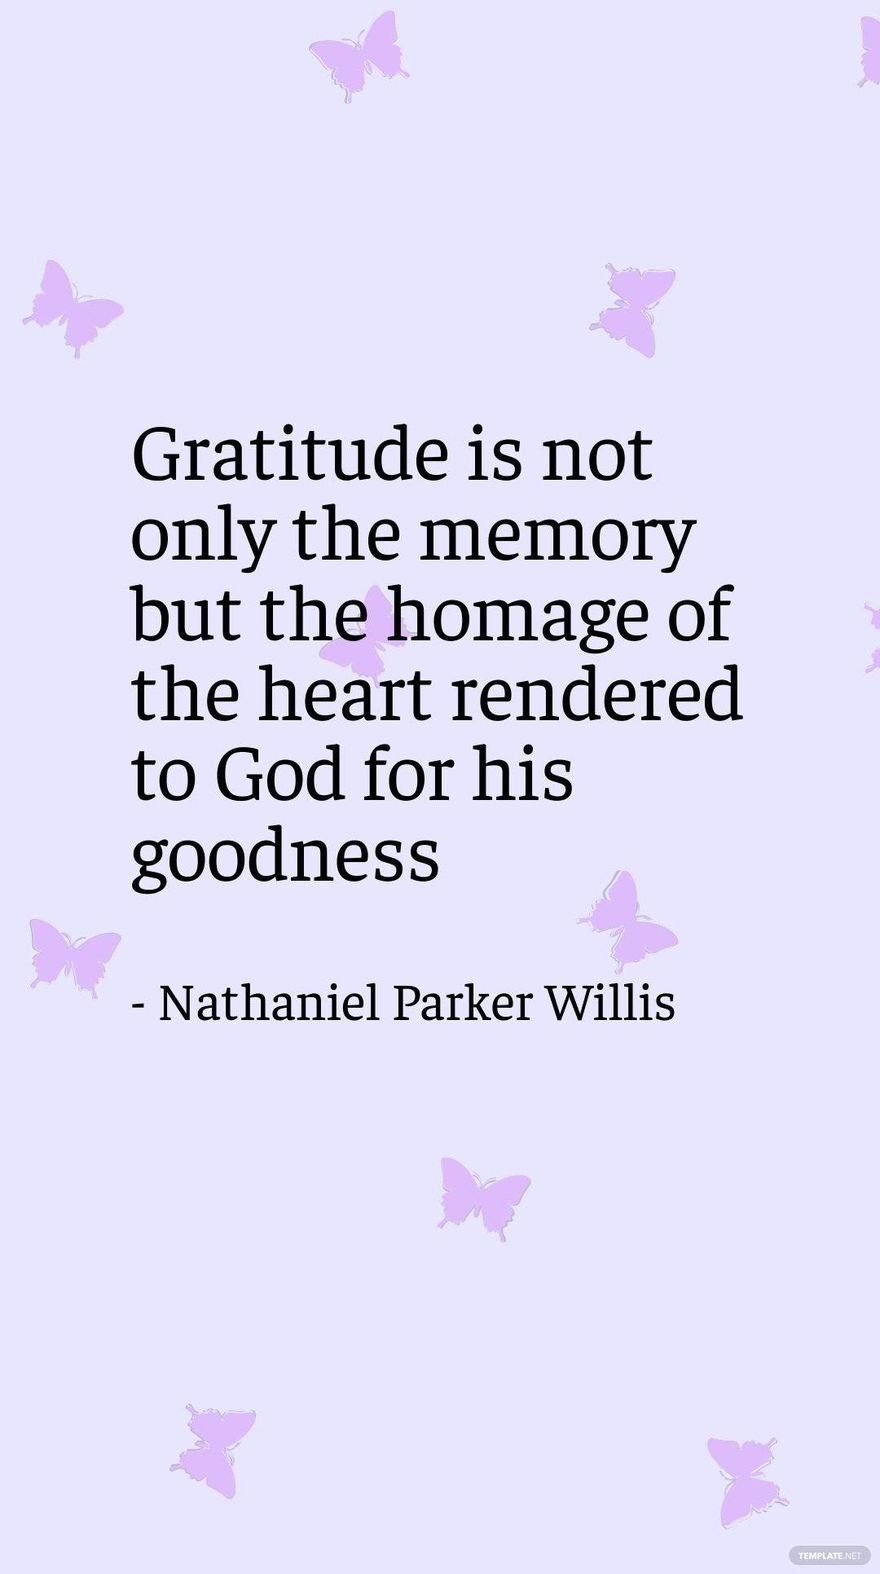 Nathaniel Parker Willis - Gratitude is not only the memory but the homage of the heart rendered to God for his goodness